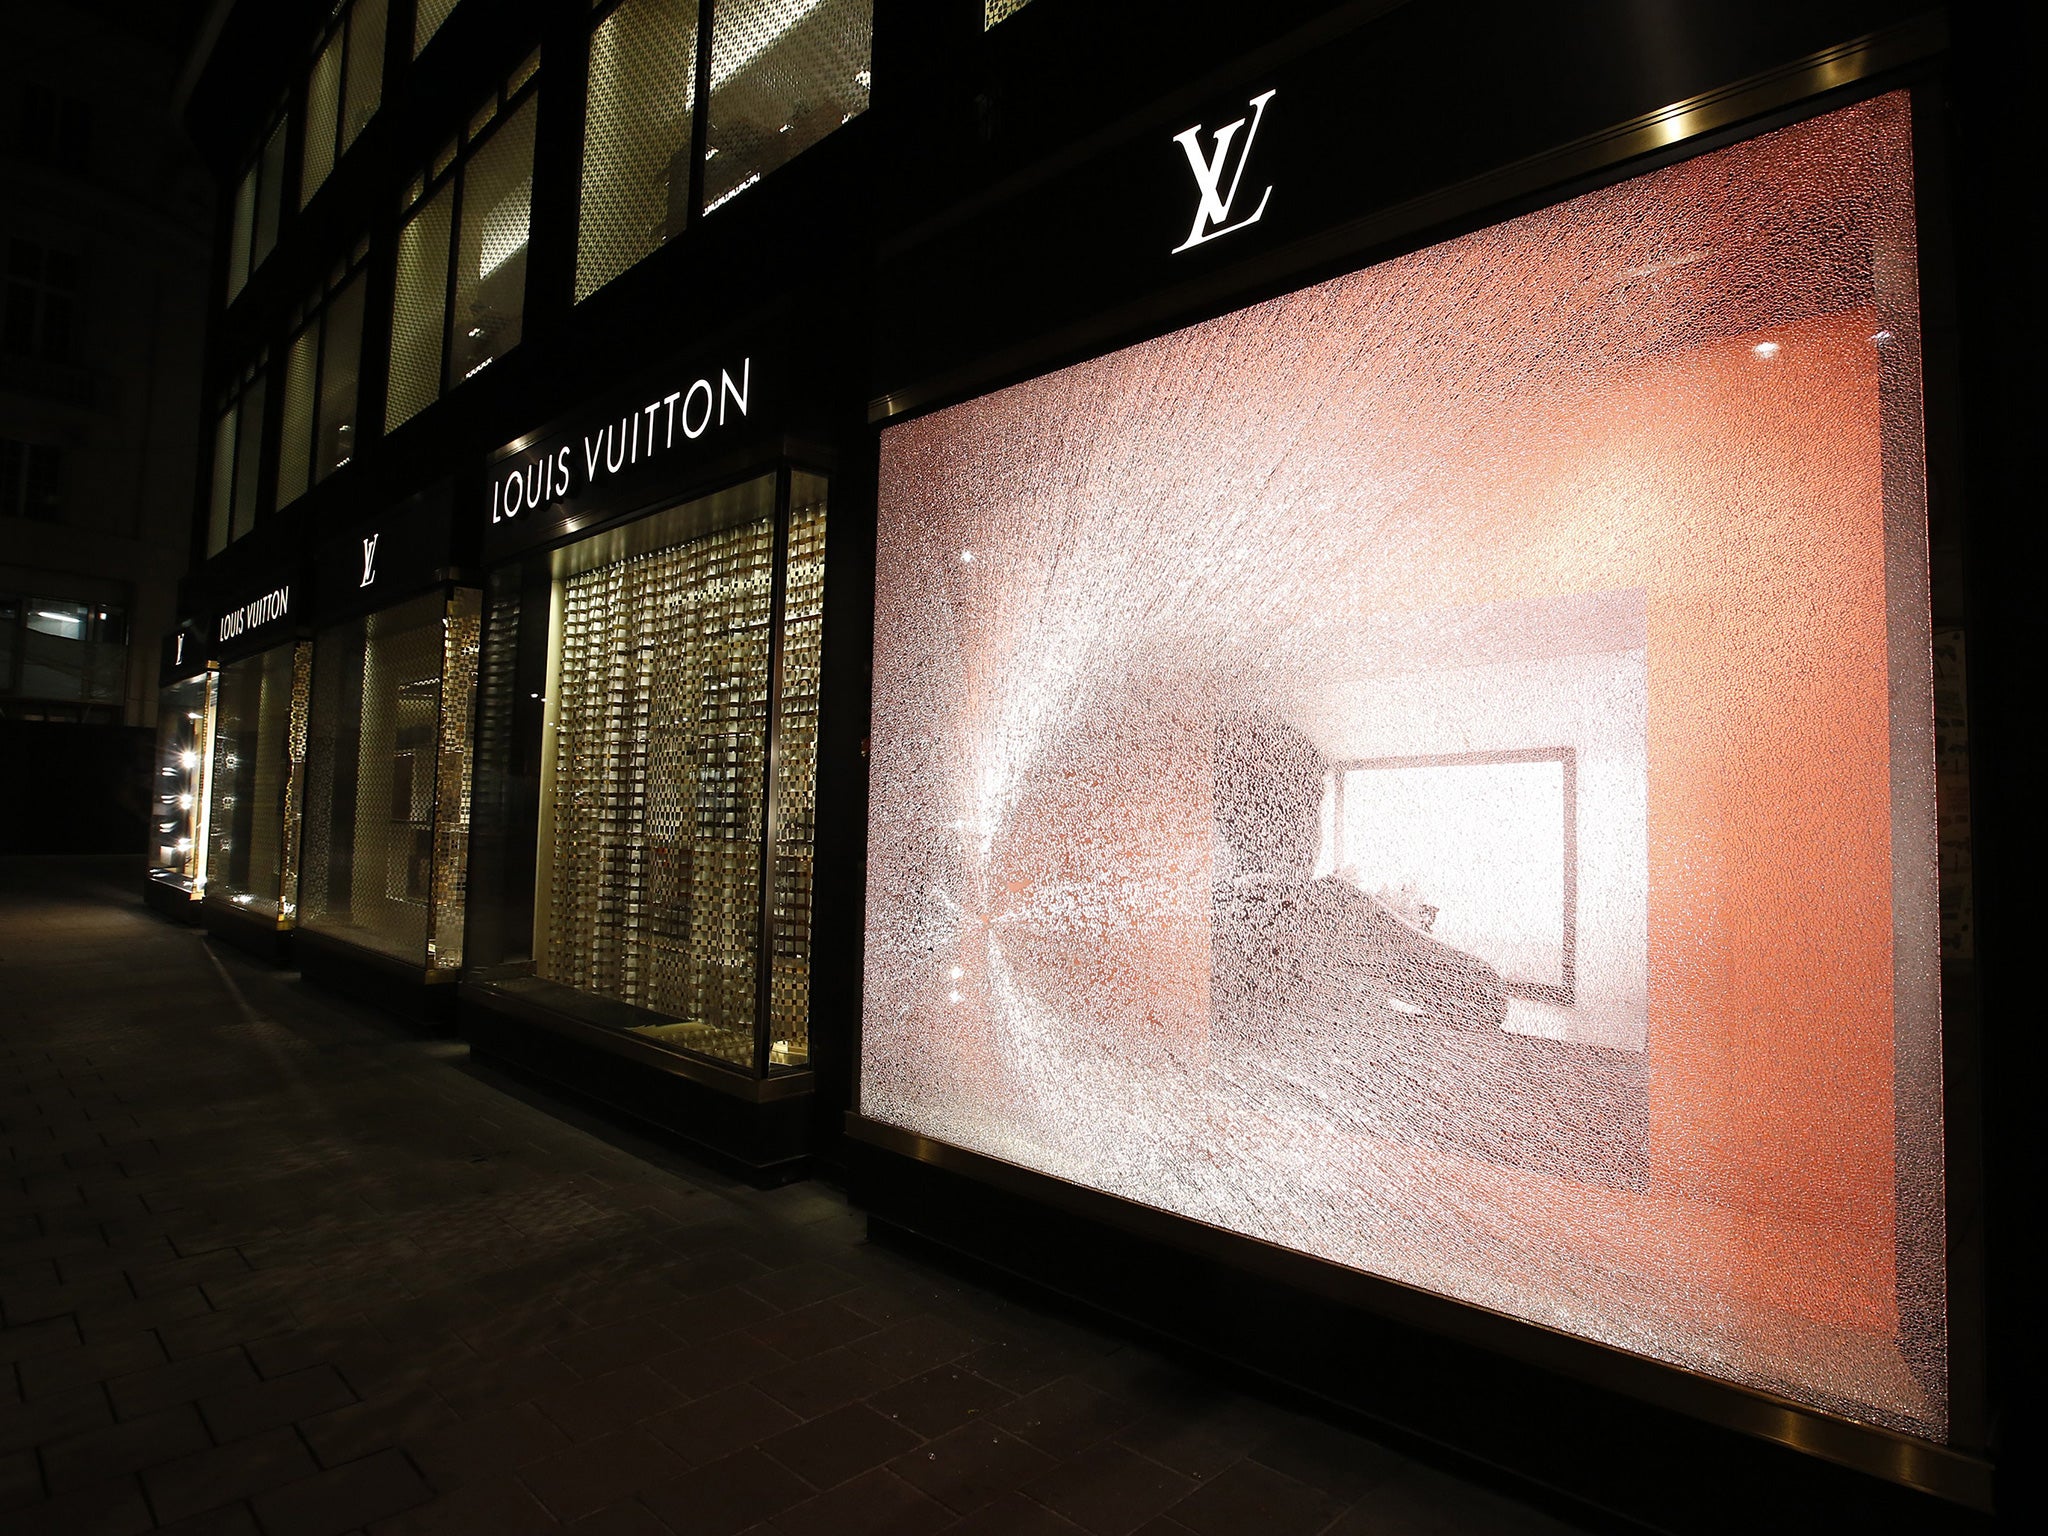 They jump, they spin, they light up: Louis Vuitton's newest